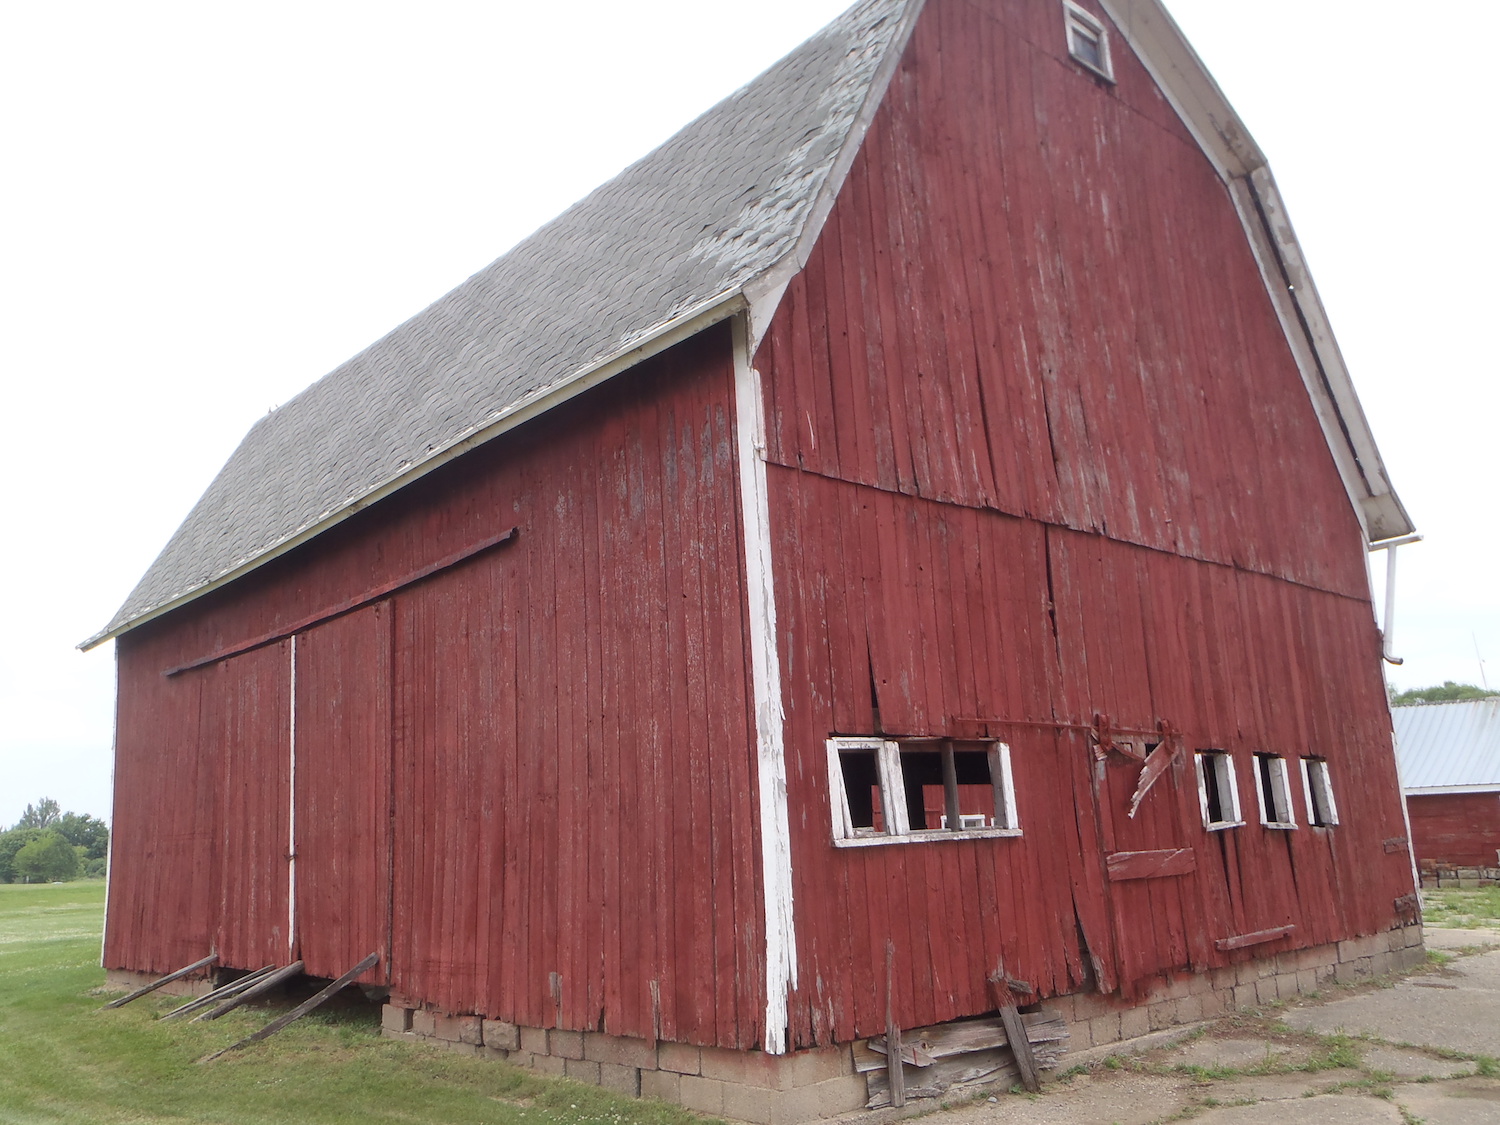 A red barn from Belleville, Michigan